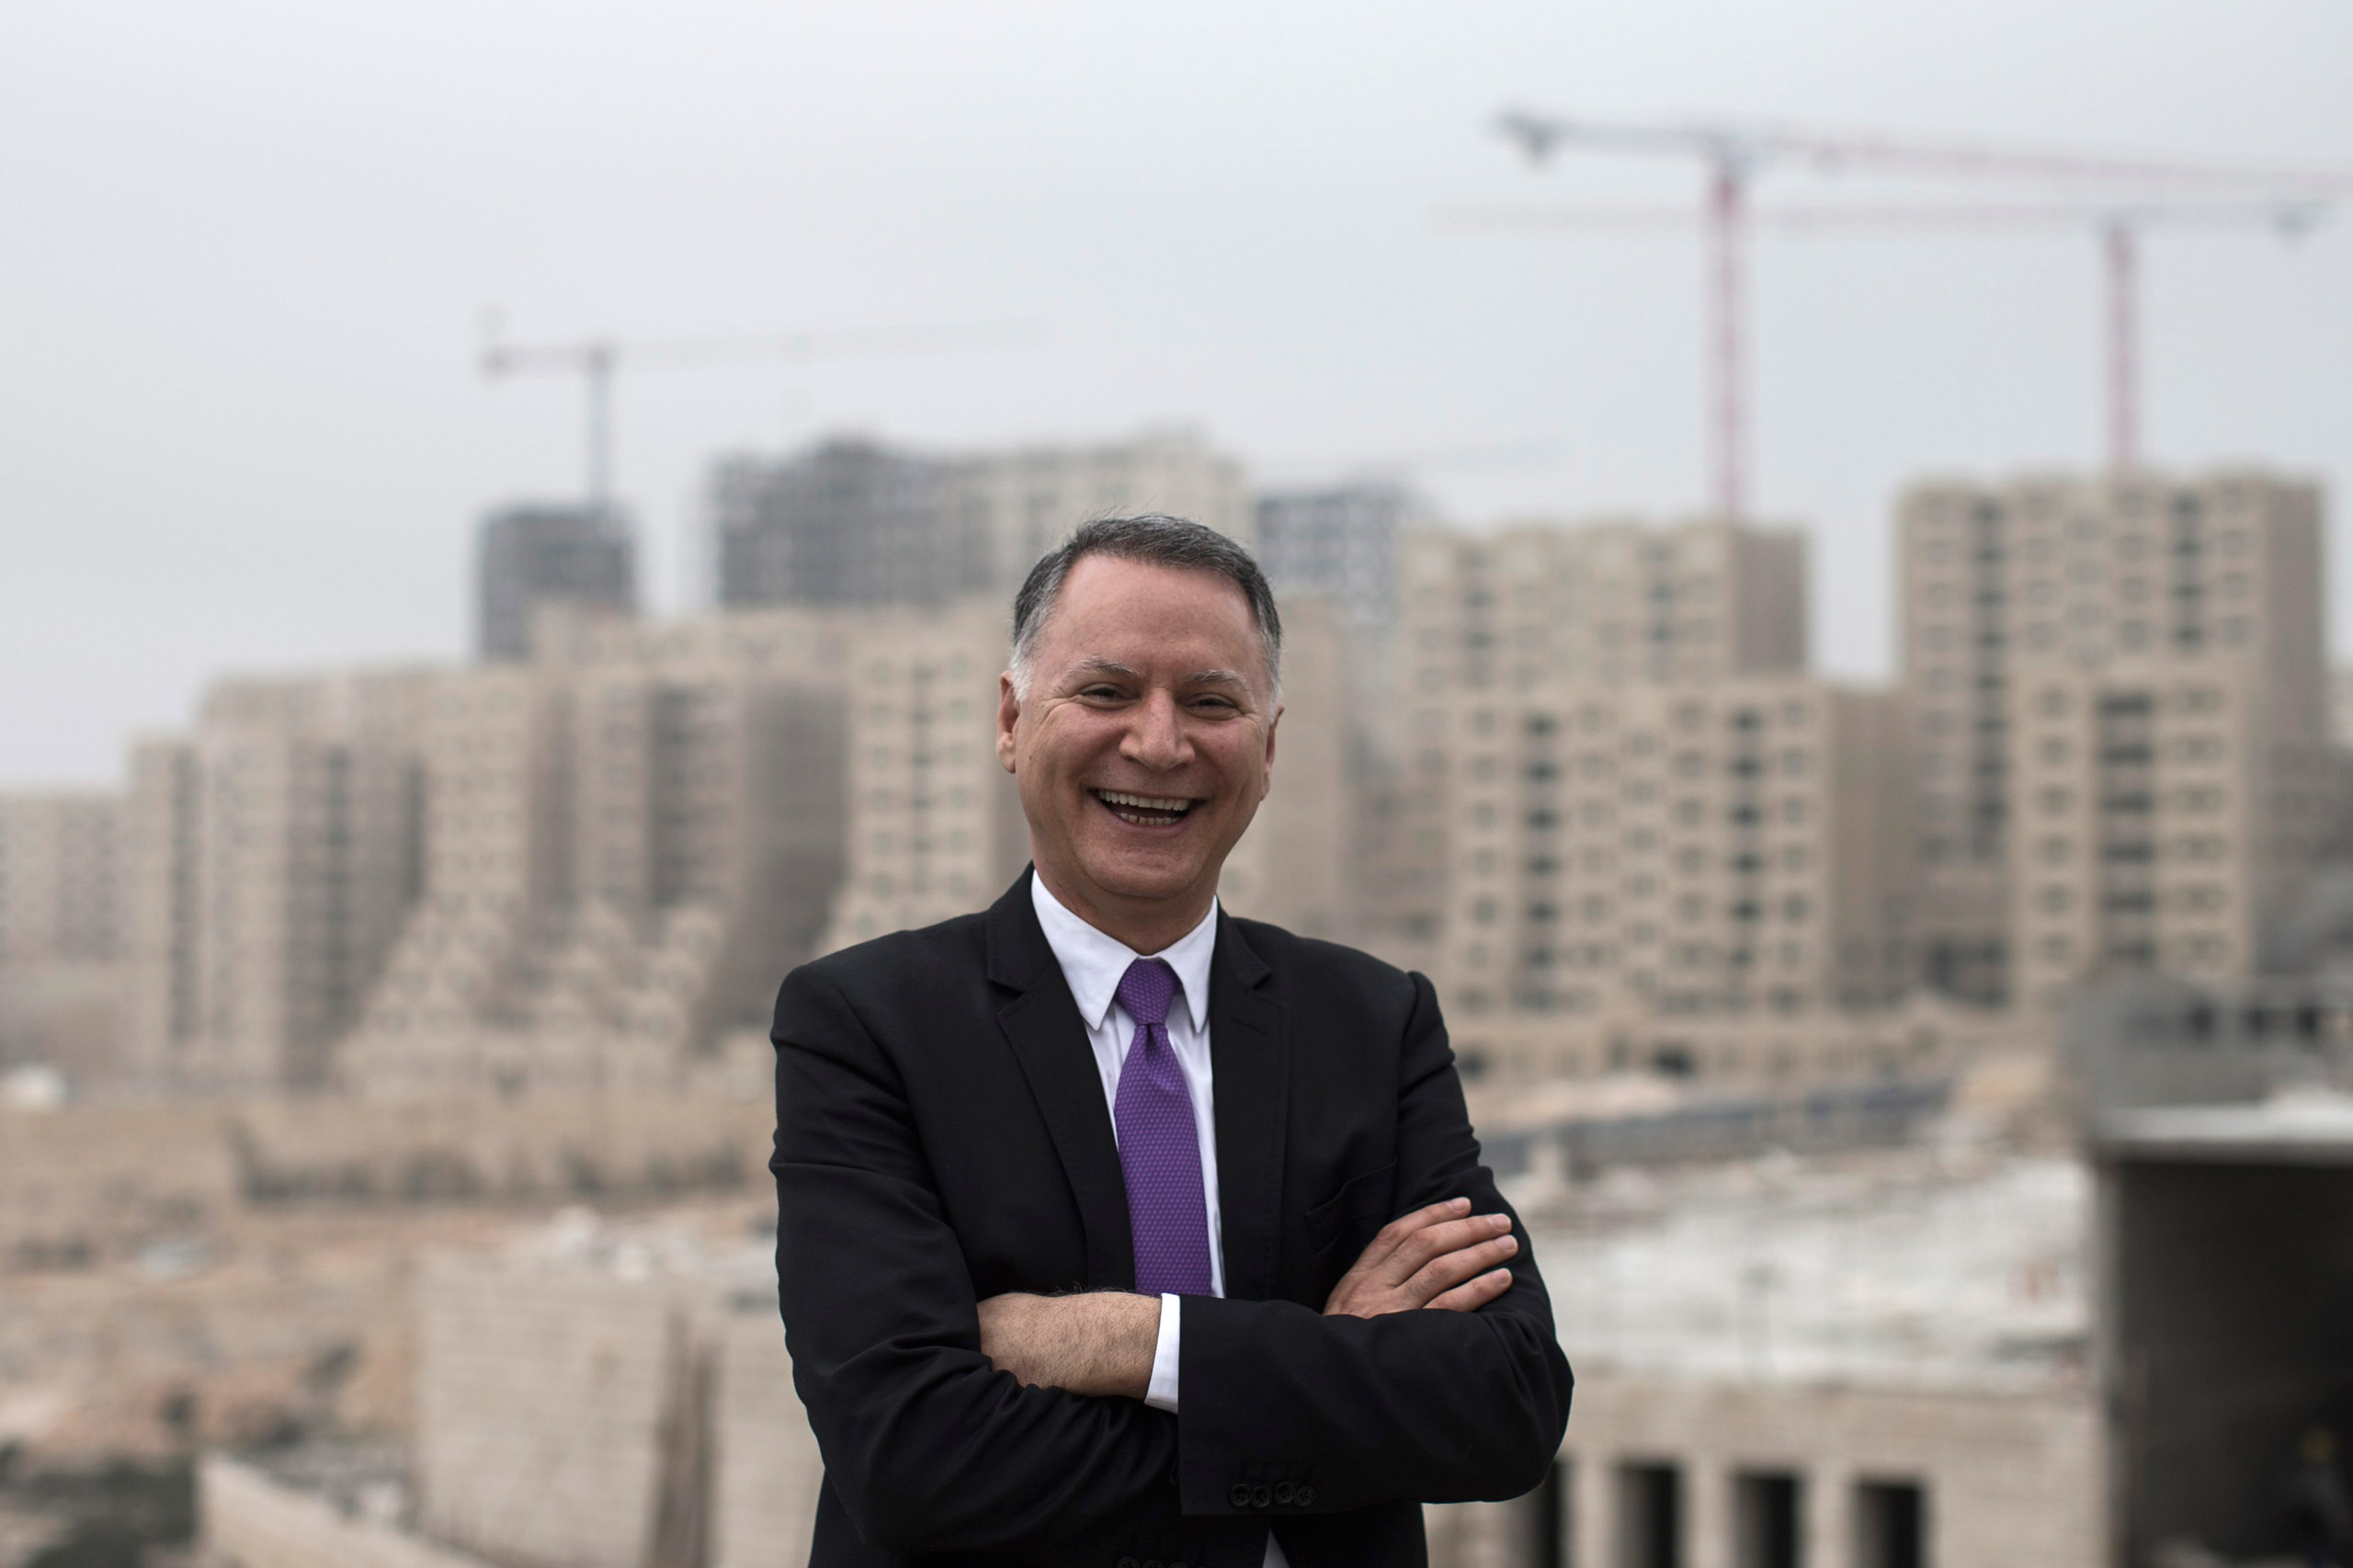 epa04099136 Bashar Masri, main investor of the new Palestinian city of Rawabi, poses for a portrait picture backdropped by apartment building under construction in Rawabi, West Bank, 24 February 2014. Rawabi is the first Palestinian planned city located between Ramallah and Nablus. The construction of the city with planned 10,000 homes began in 2010 and the first of the future 40,000 inhabitants are due to move in by the end of 2014.  EPA/OLIVER WEIKEN